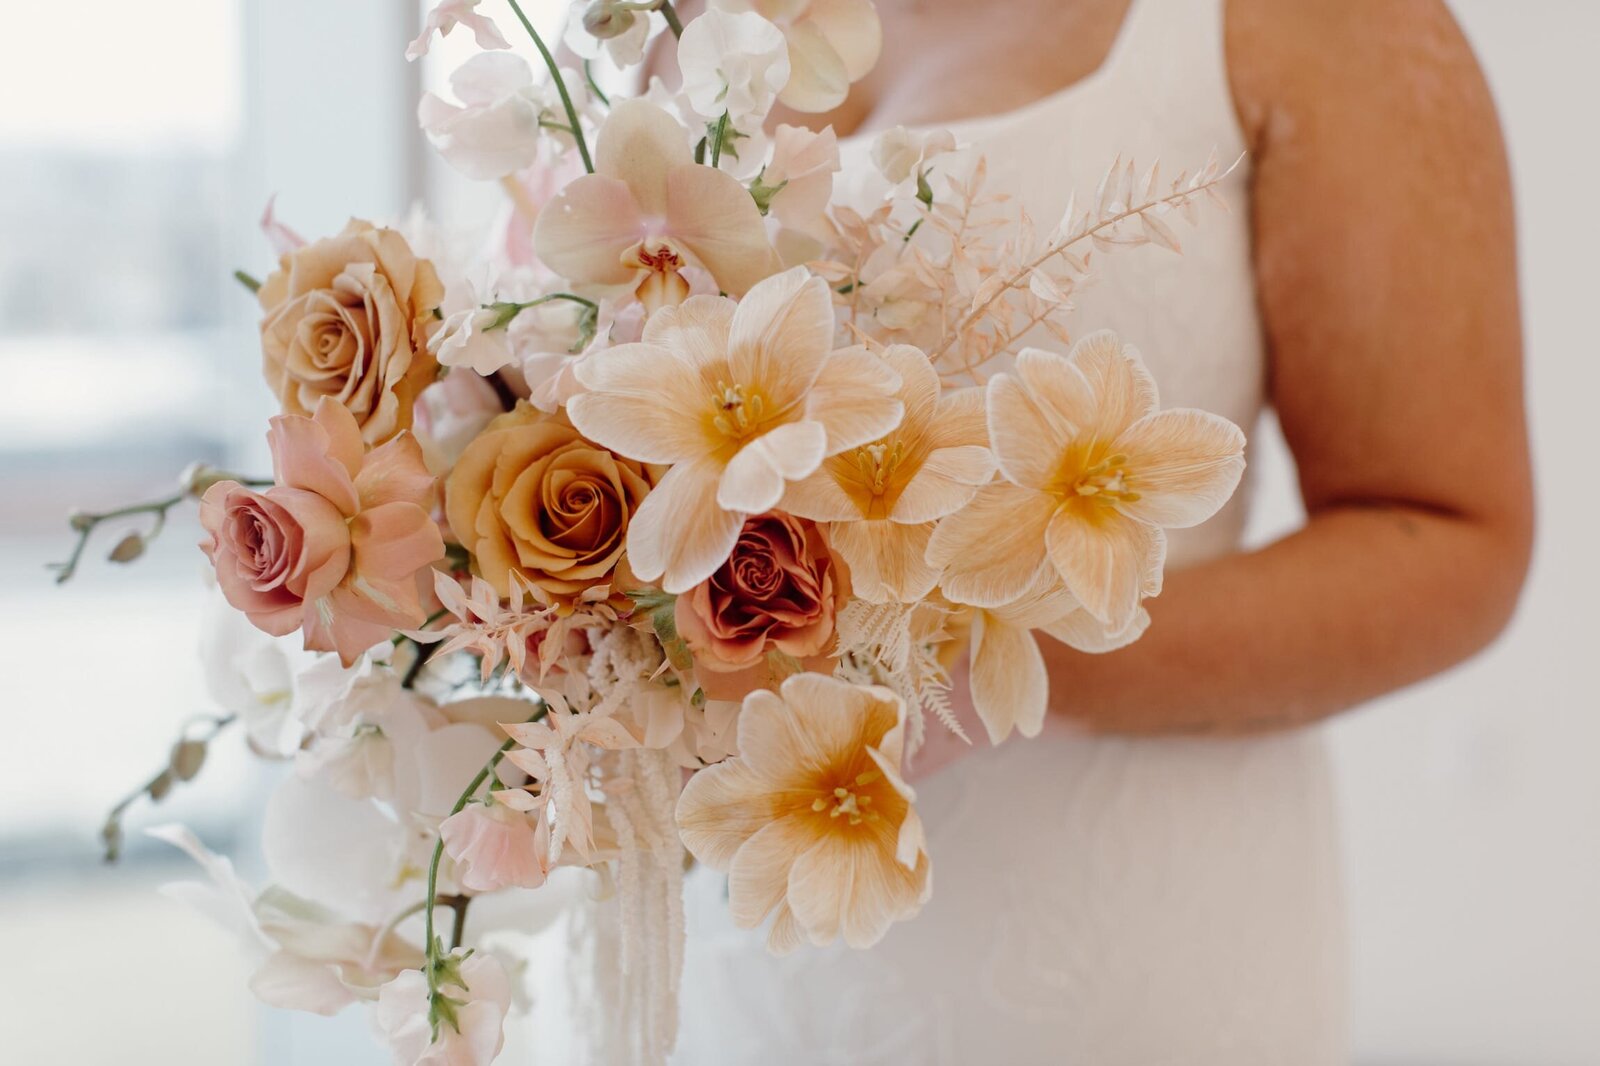 A peach, yellow, and pink bridal bouquet, up close and held by a bride on her wedding day.